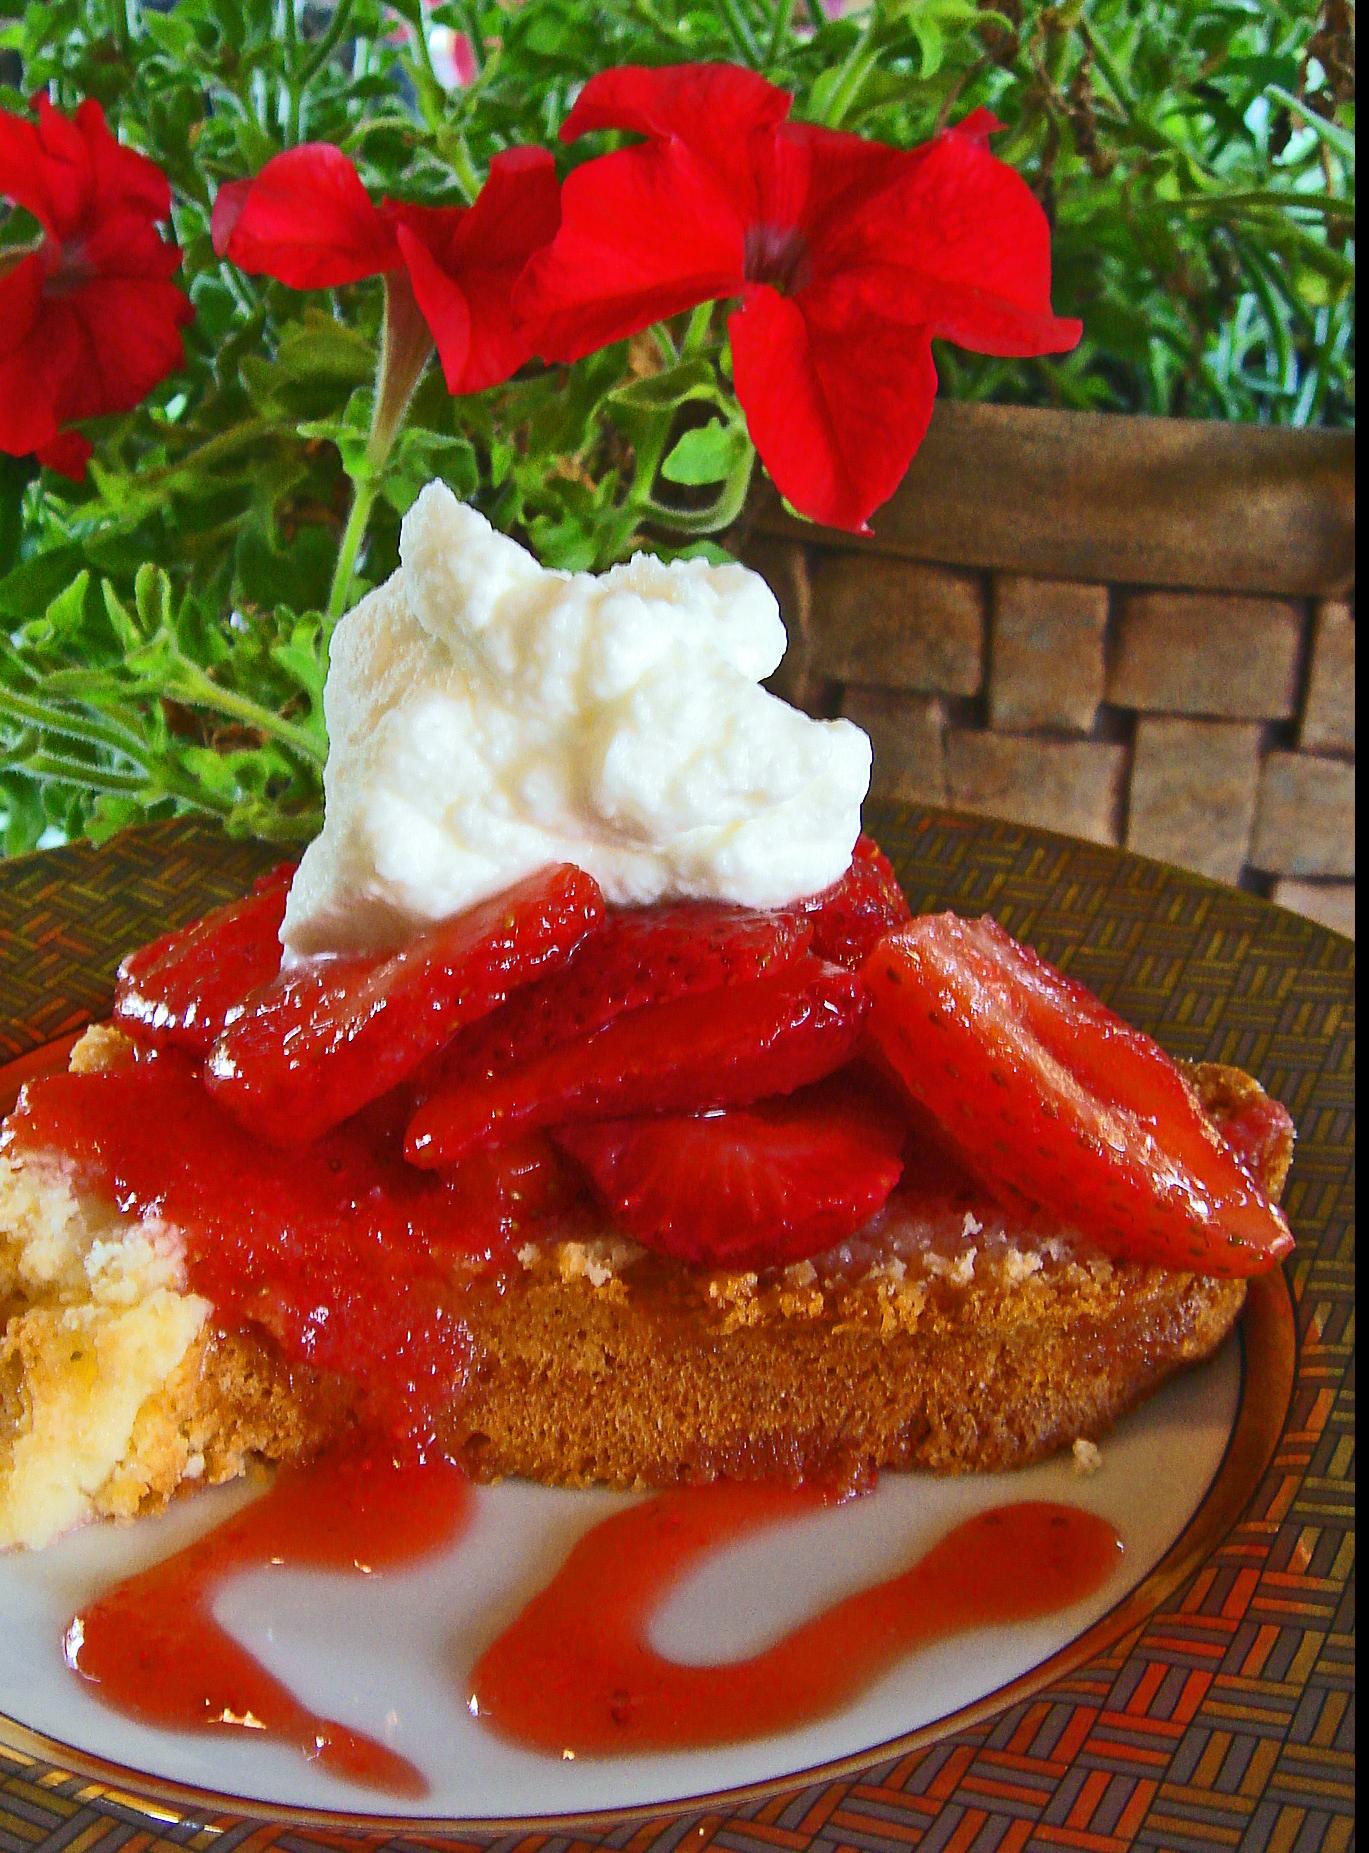  A slice of heaven on a plate: Cream Cheese Pound Cake with fresh strawberries and whipped cream.